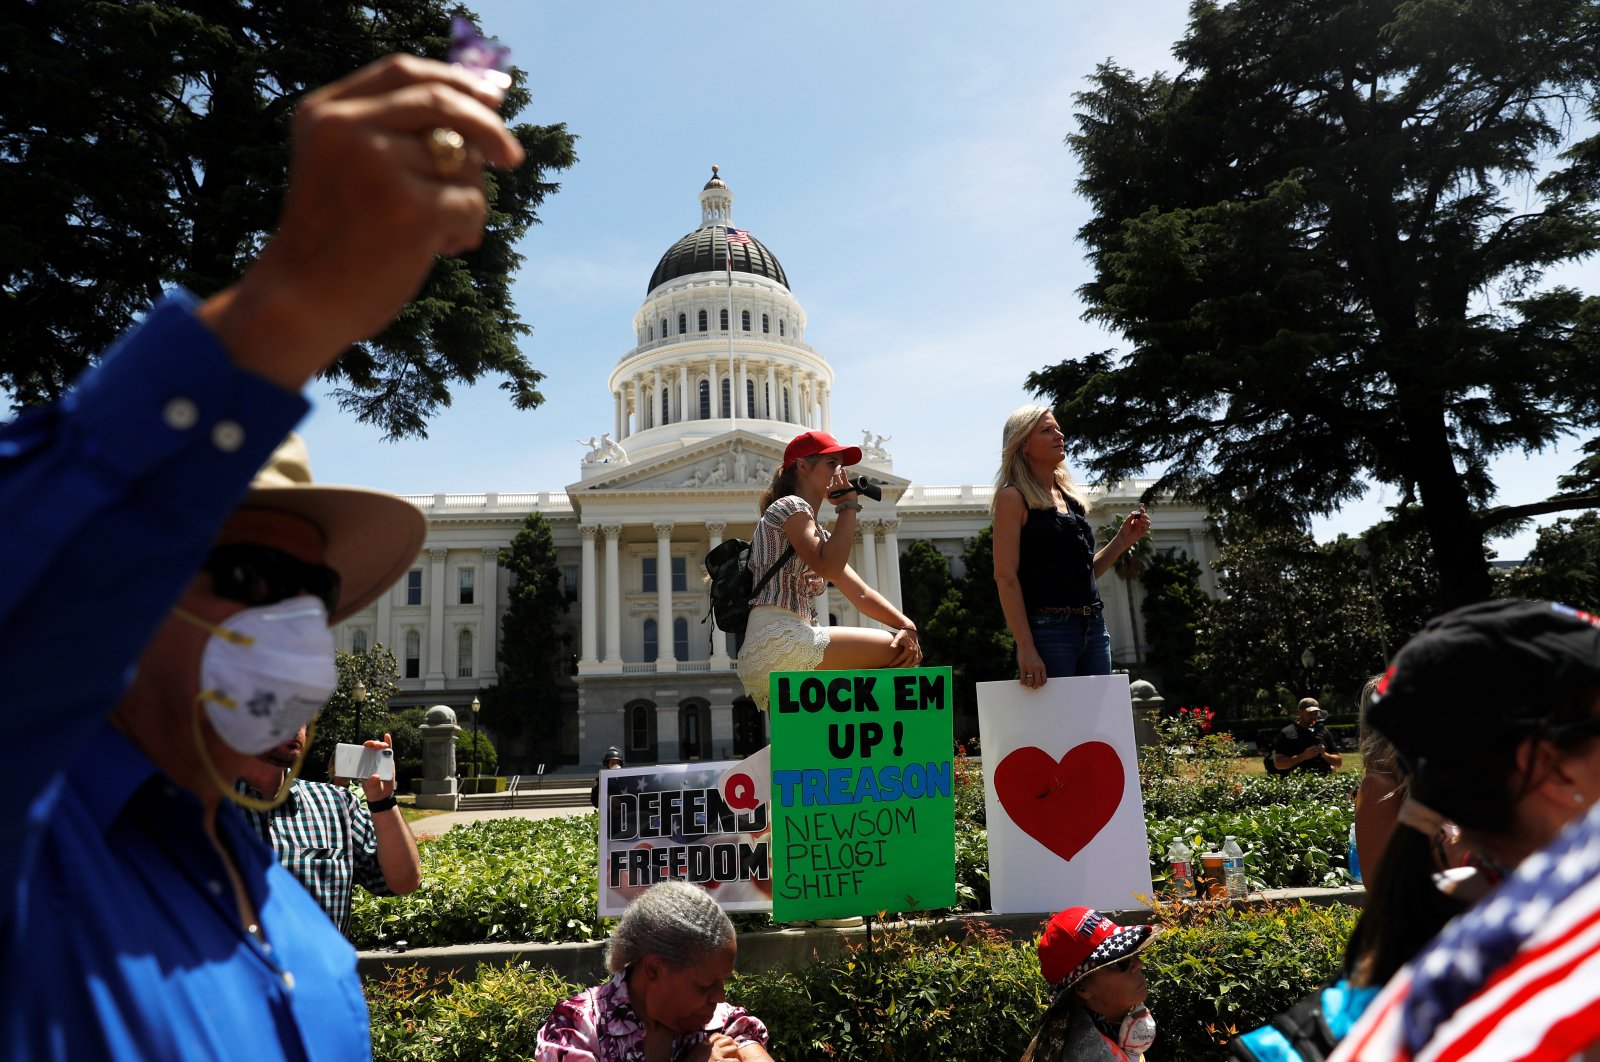 Demonstrators rally during a protest calling for the reopening of California amid the coronavirus outbreak outside the California State Capitol building in Sacramento, California, U.S., May 7, 2020. (Reuters Photo)